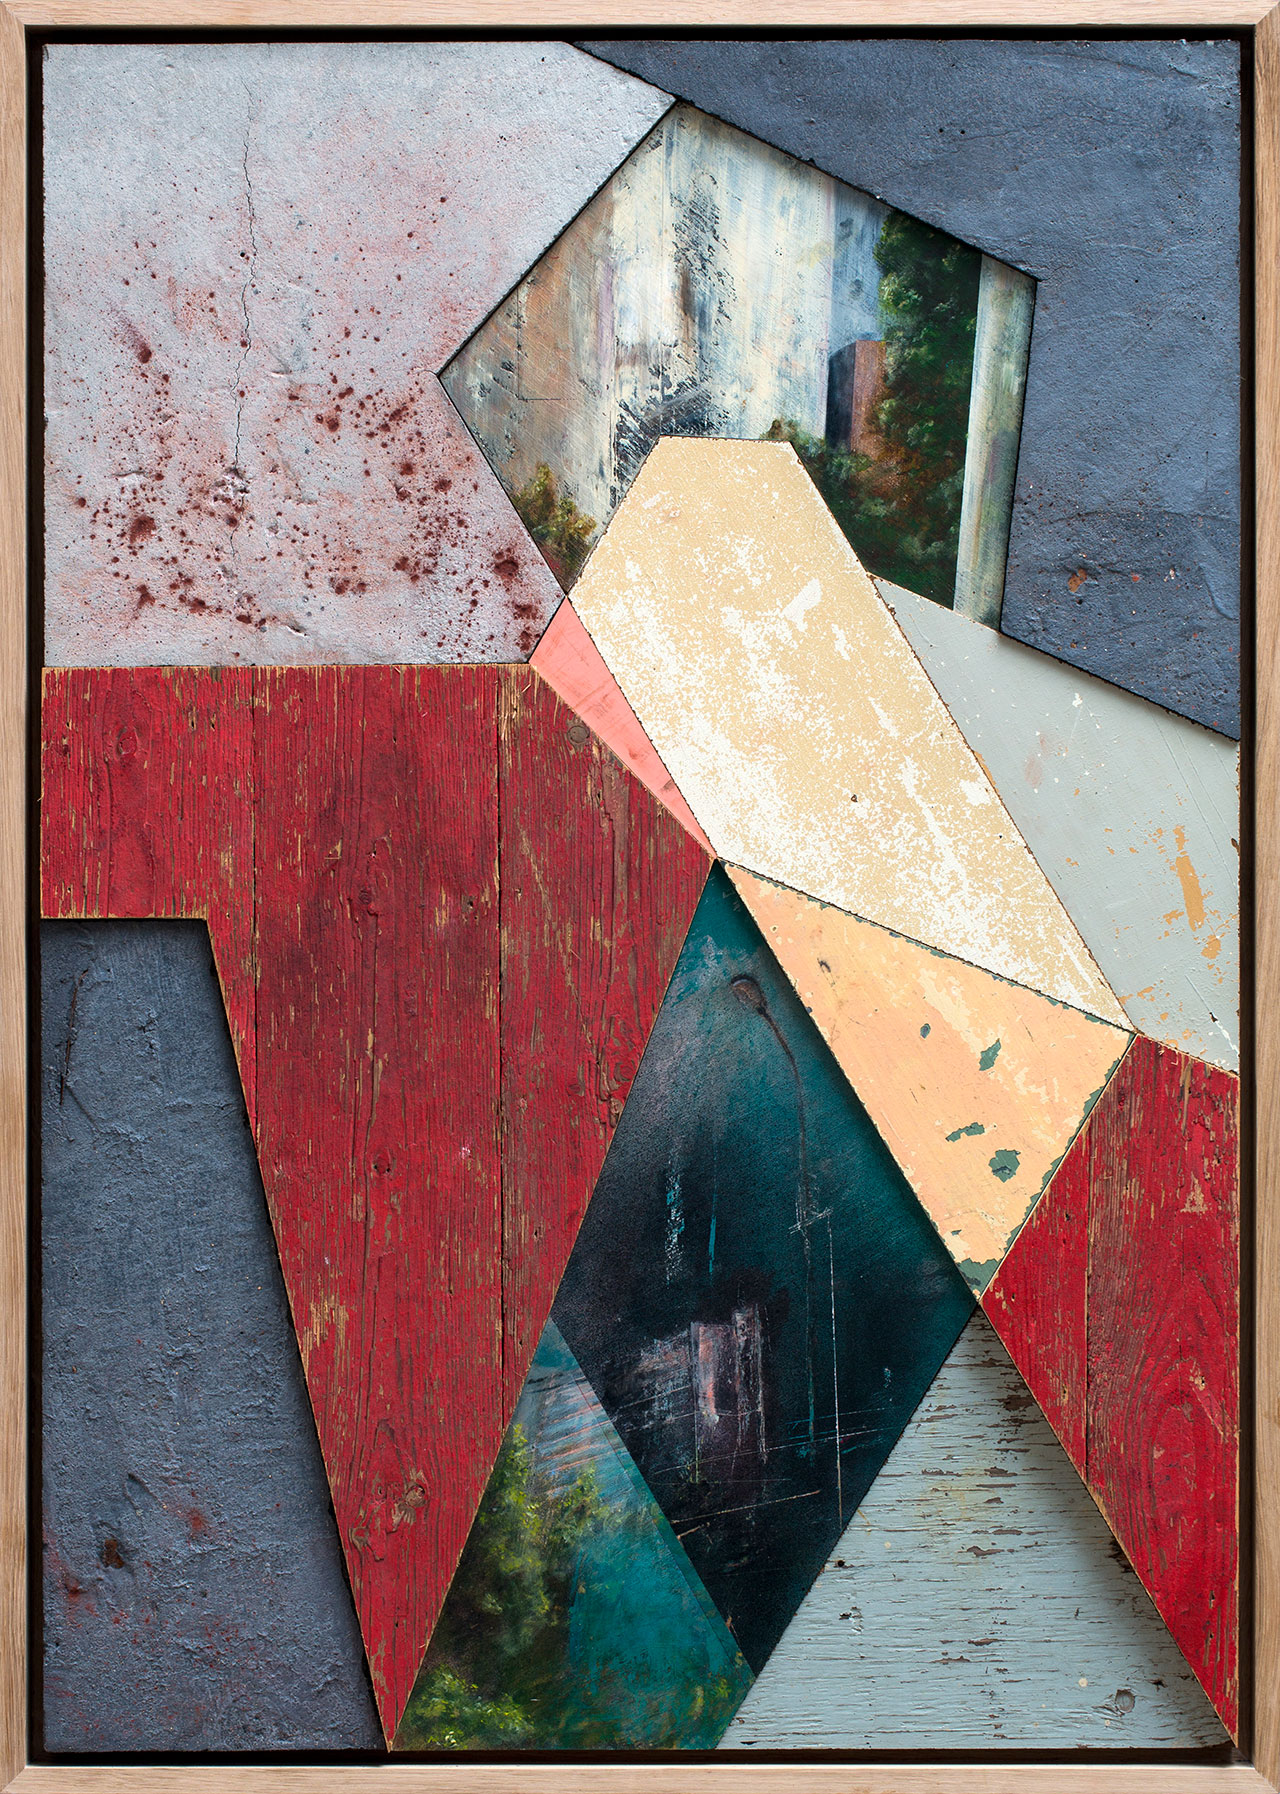 He moved on, 2015. Recycled wood, concrete, acrylic and medium on wood panel – Framed, 105 x 75 cm. Photo © Strook.